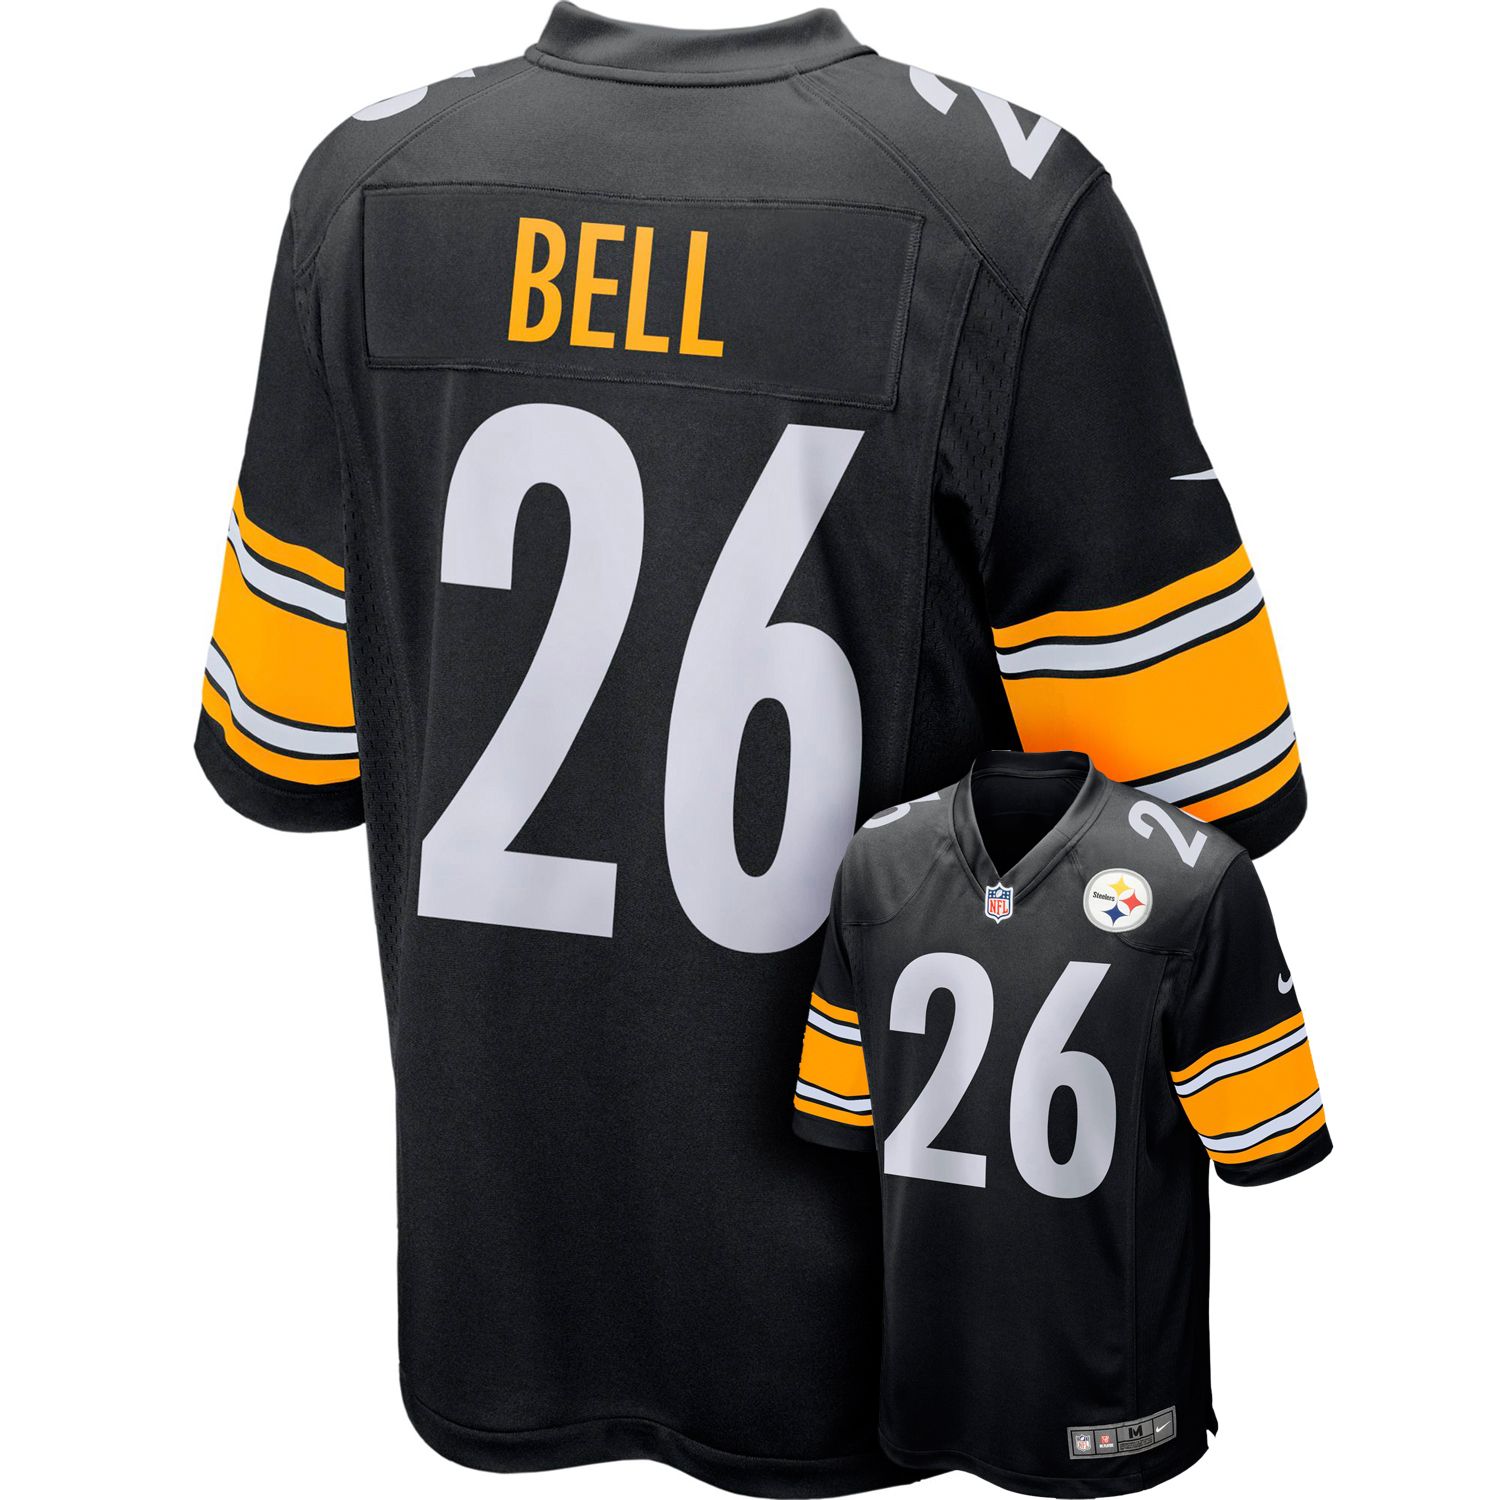 Pittsburgh Steelers Le'Veon Bell 